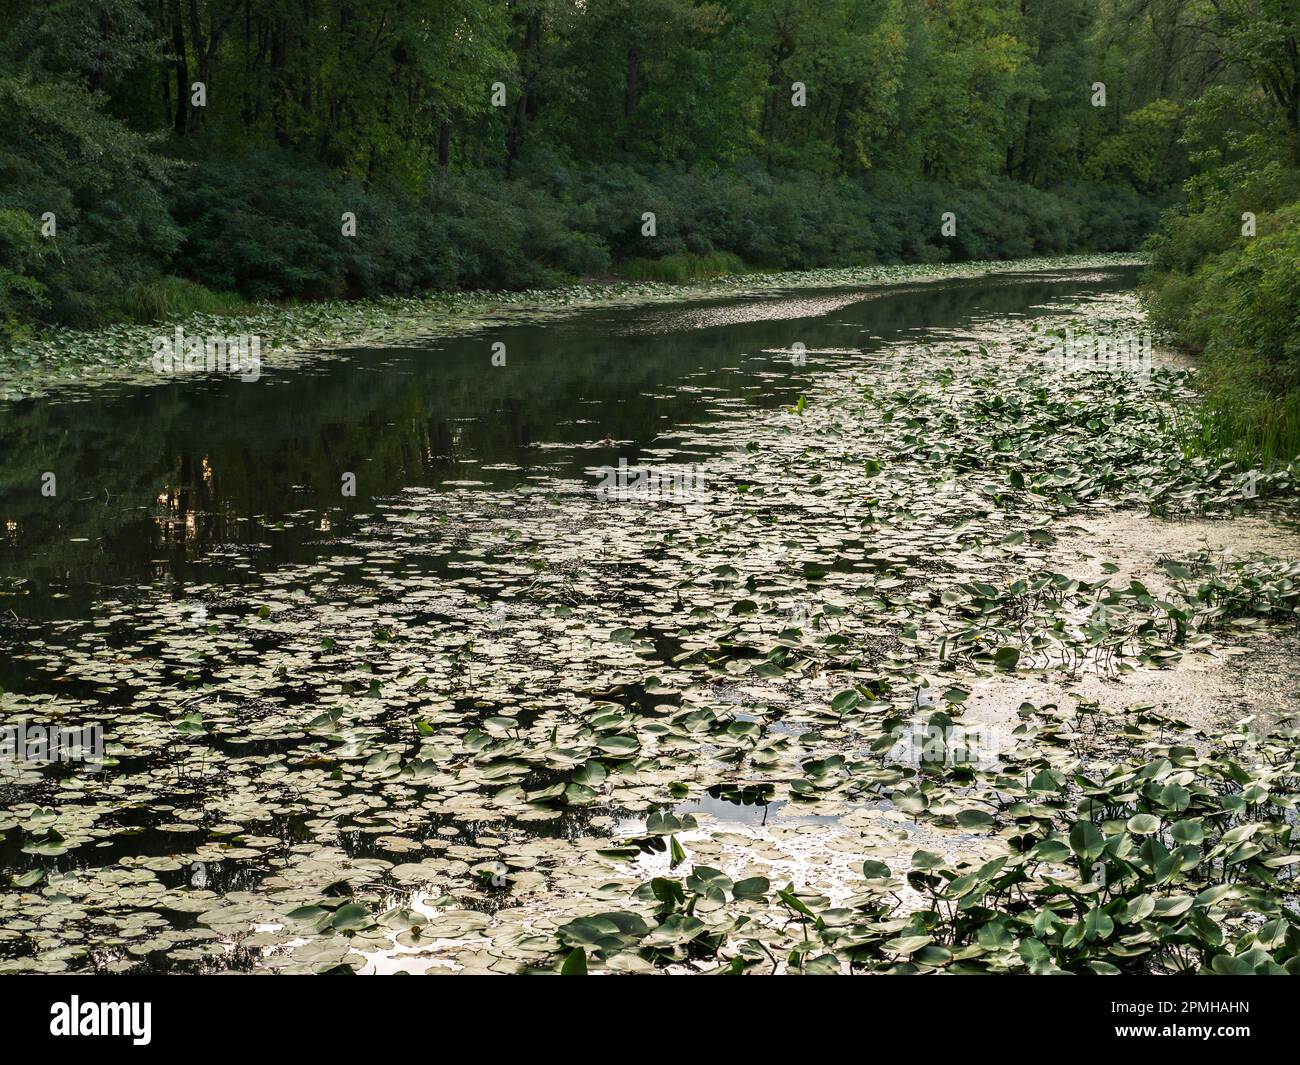 Narrow Dnipro river bay covered by large green lily leaves and surrounded by dense thickets on a murky gloomy day in Kyiv, Ukraine. Stock Photo